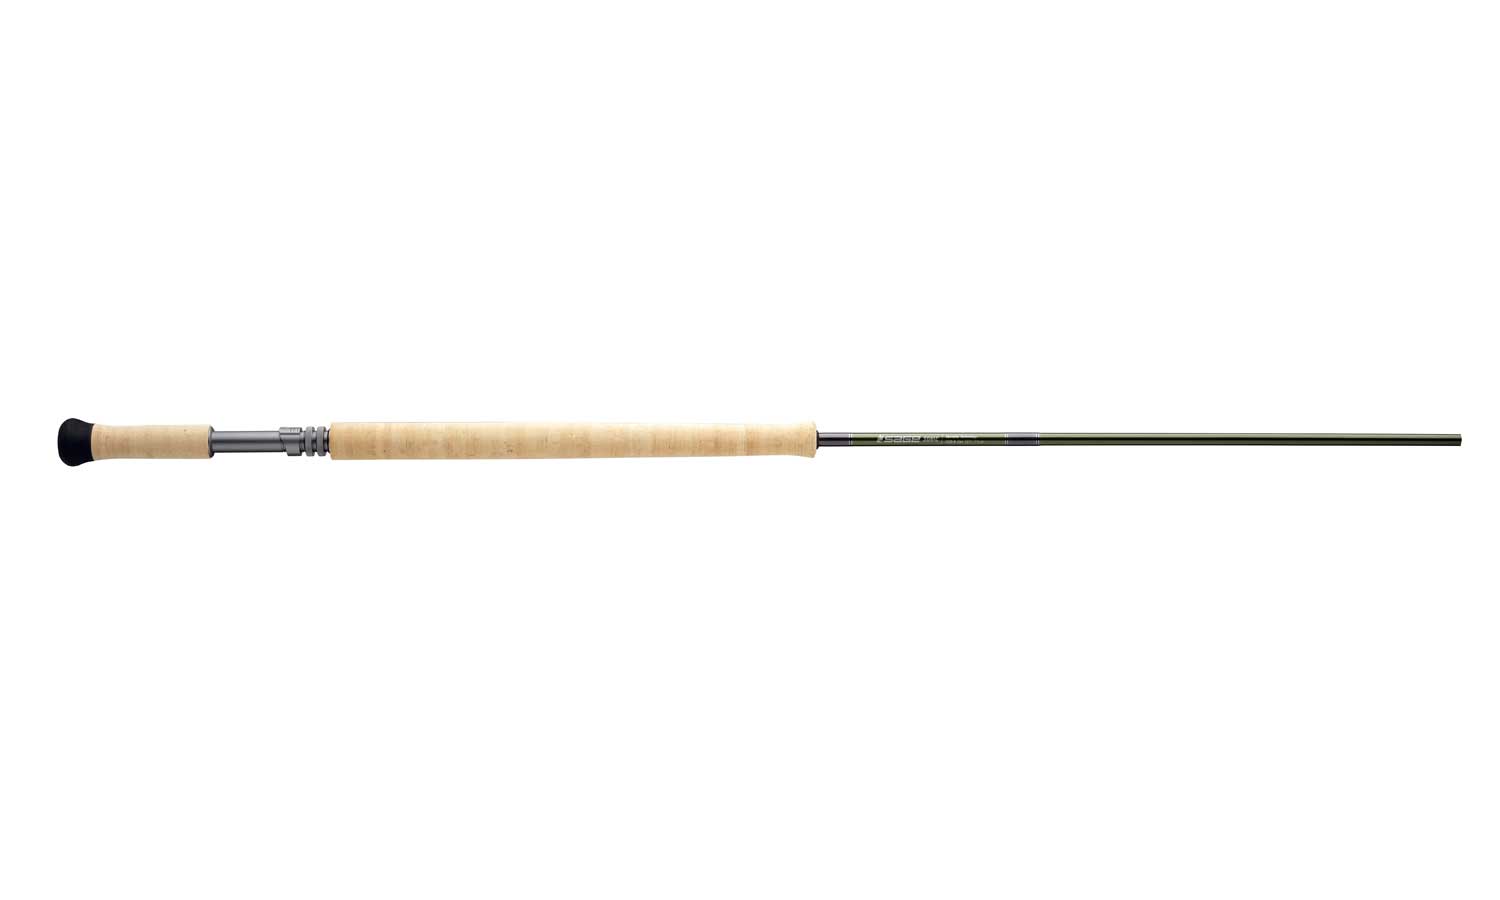 Sage Sonic Switch Fly Rod – Guide Flyfishing, Fly Fishing Rods, Reels, Sage, Redington, RIO